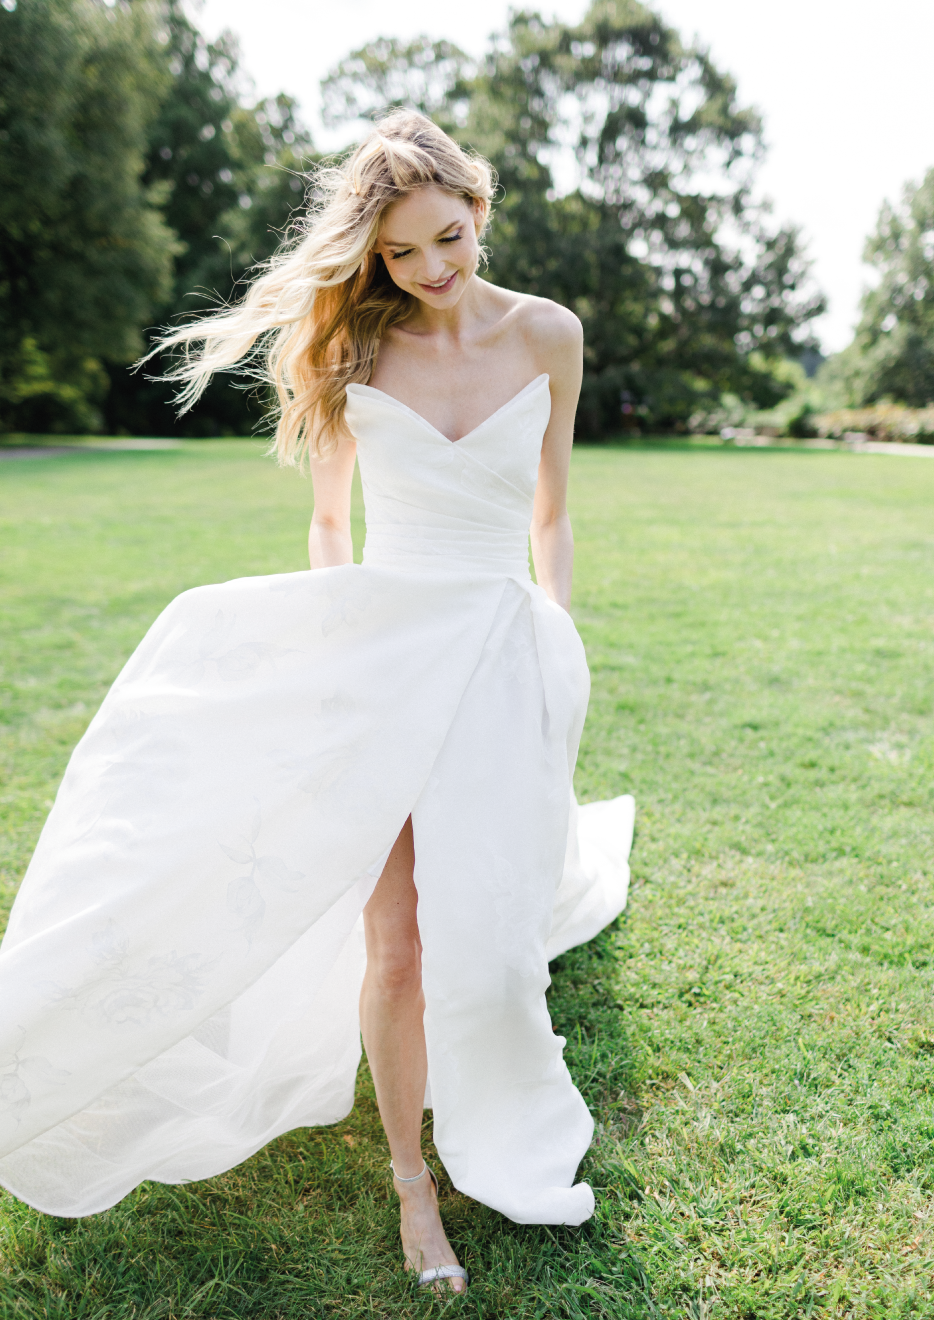 Bride Dress Model Jane - Dress with open front skirt and cathedral train - Verdin New York